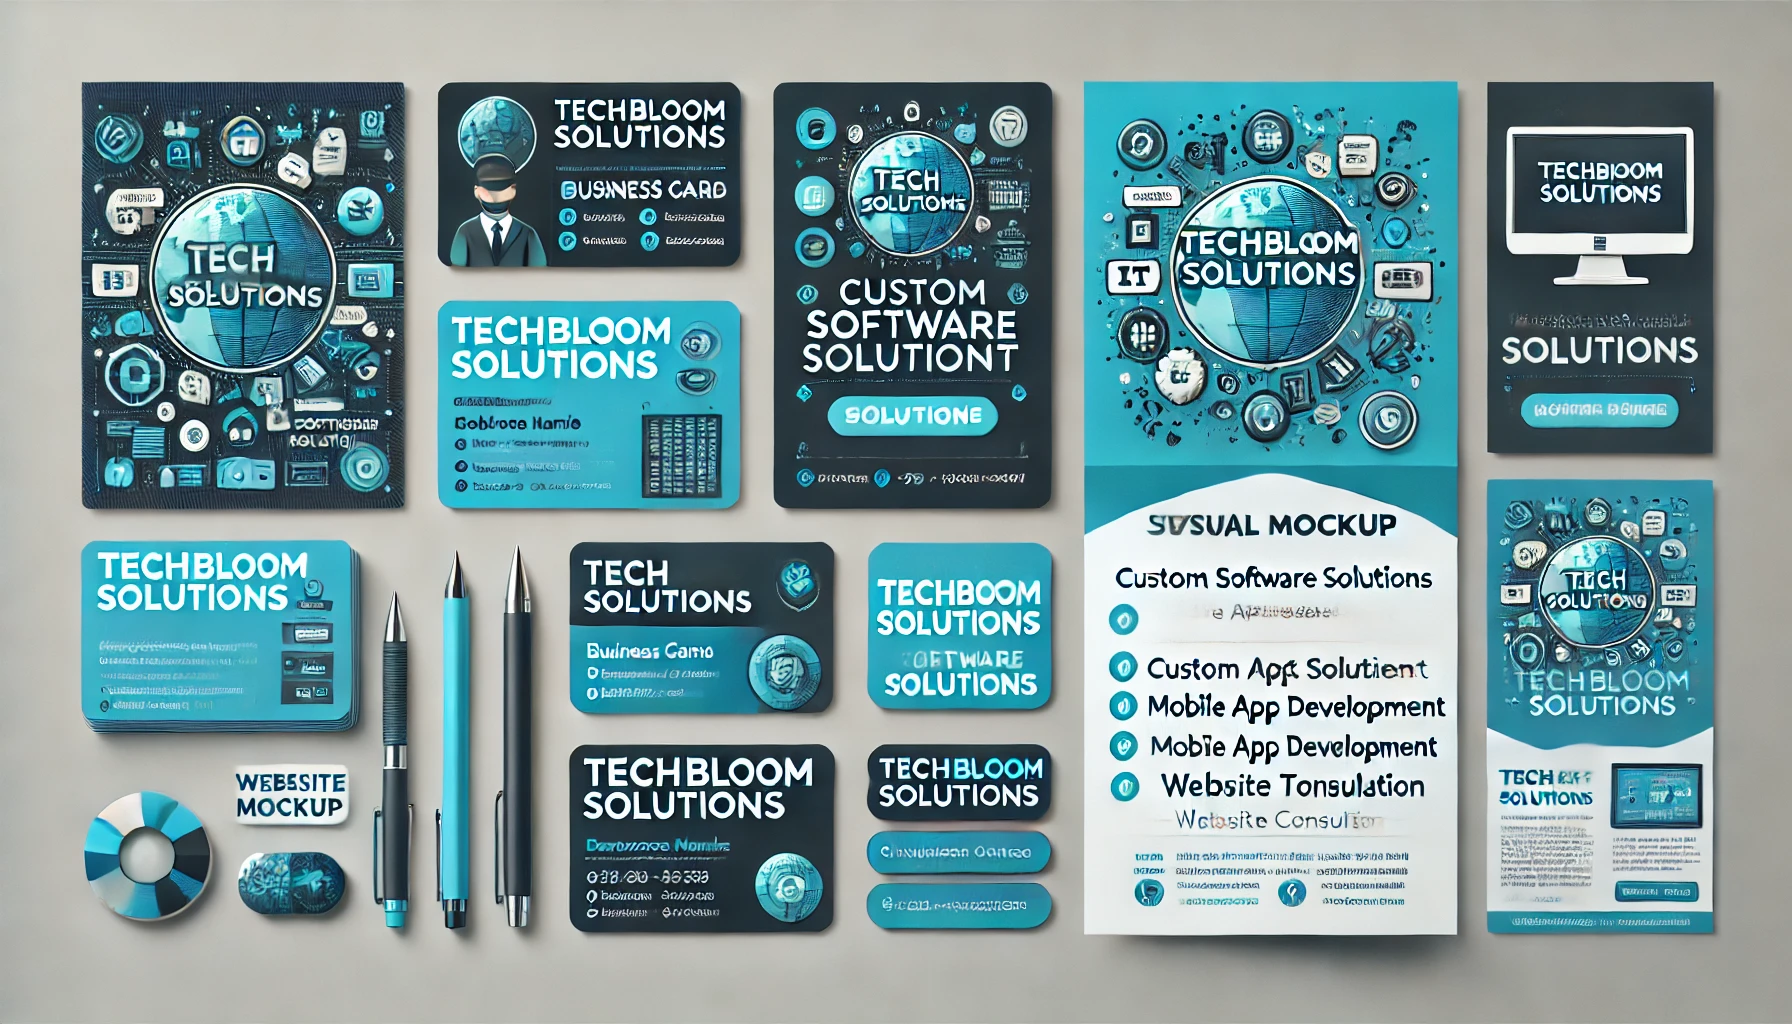 Print design portfolio showcasing business cards, brochures, and flyers for EcoGreen Solutions, a fictitious company, with consistent branding and vibrant colors.